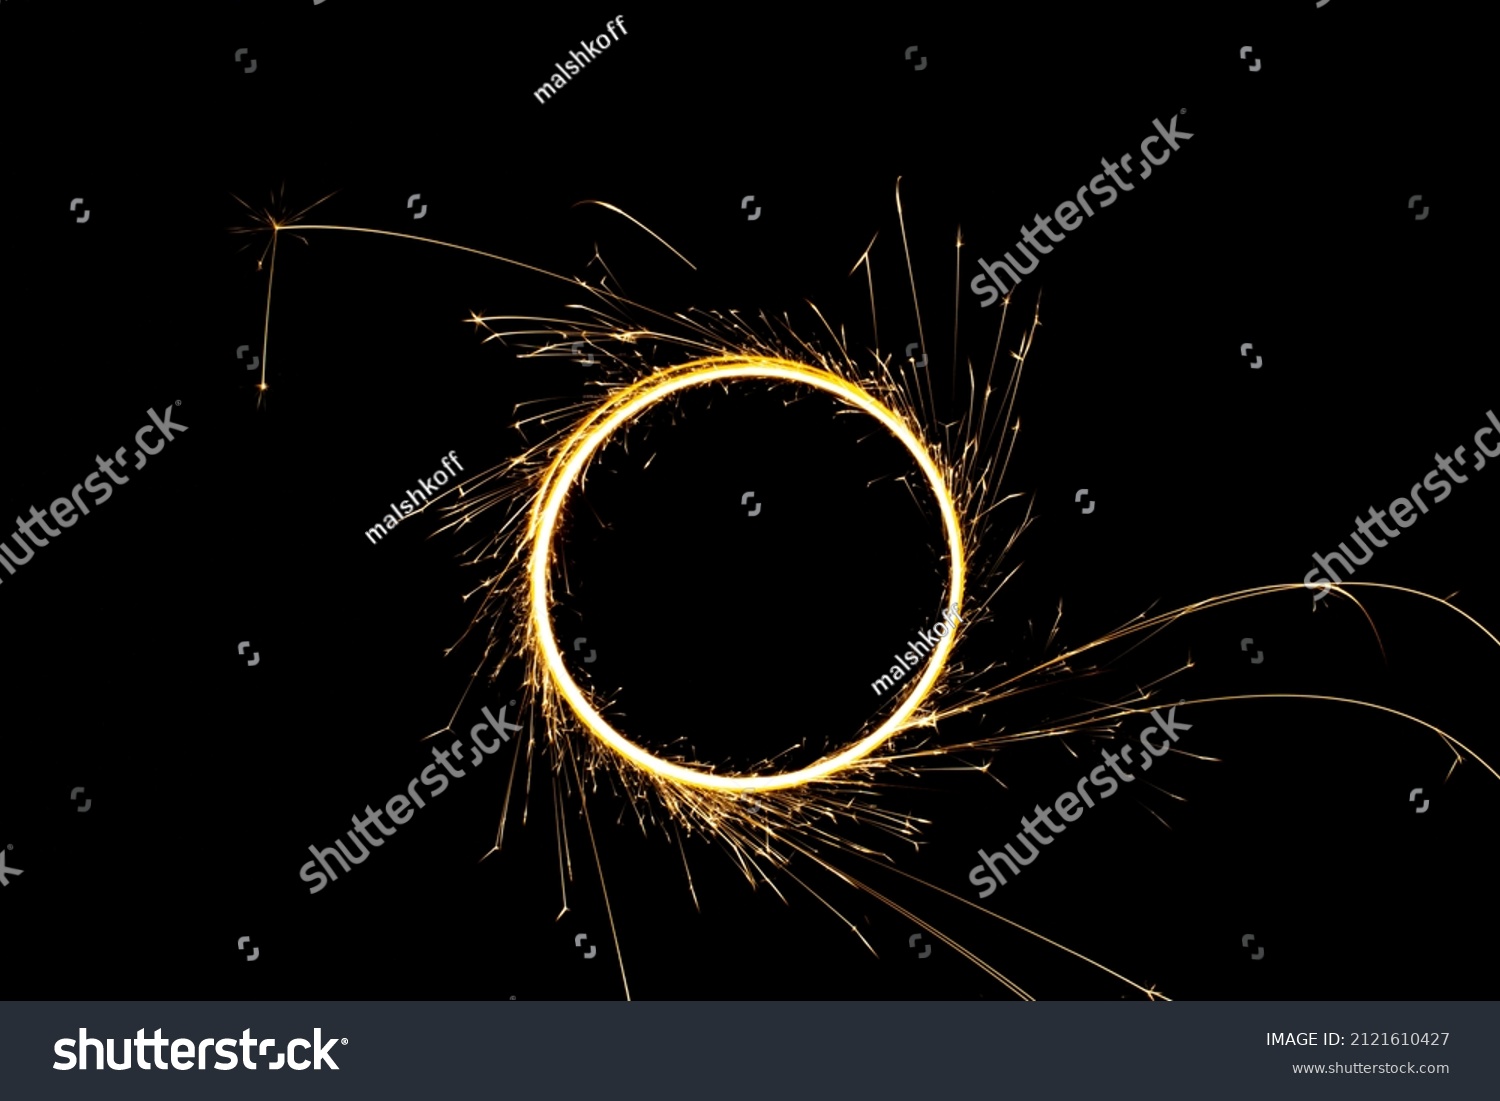 Circular lights with sparks on a black background #2121610427